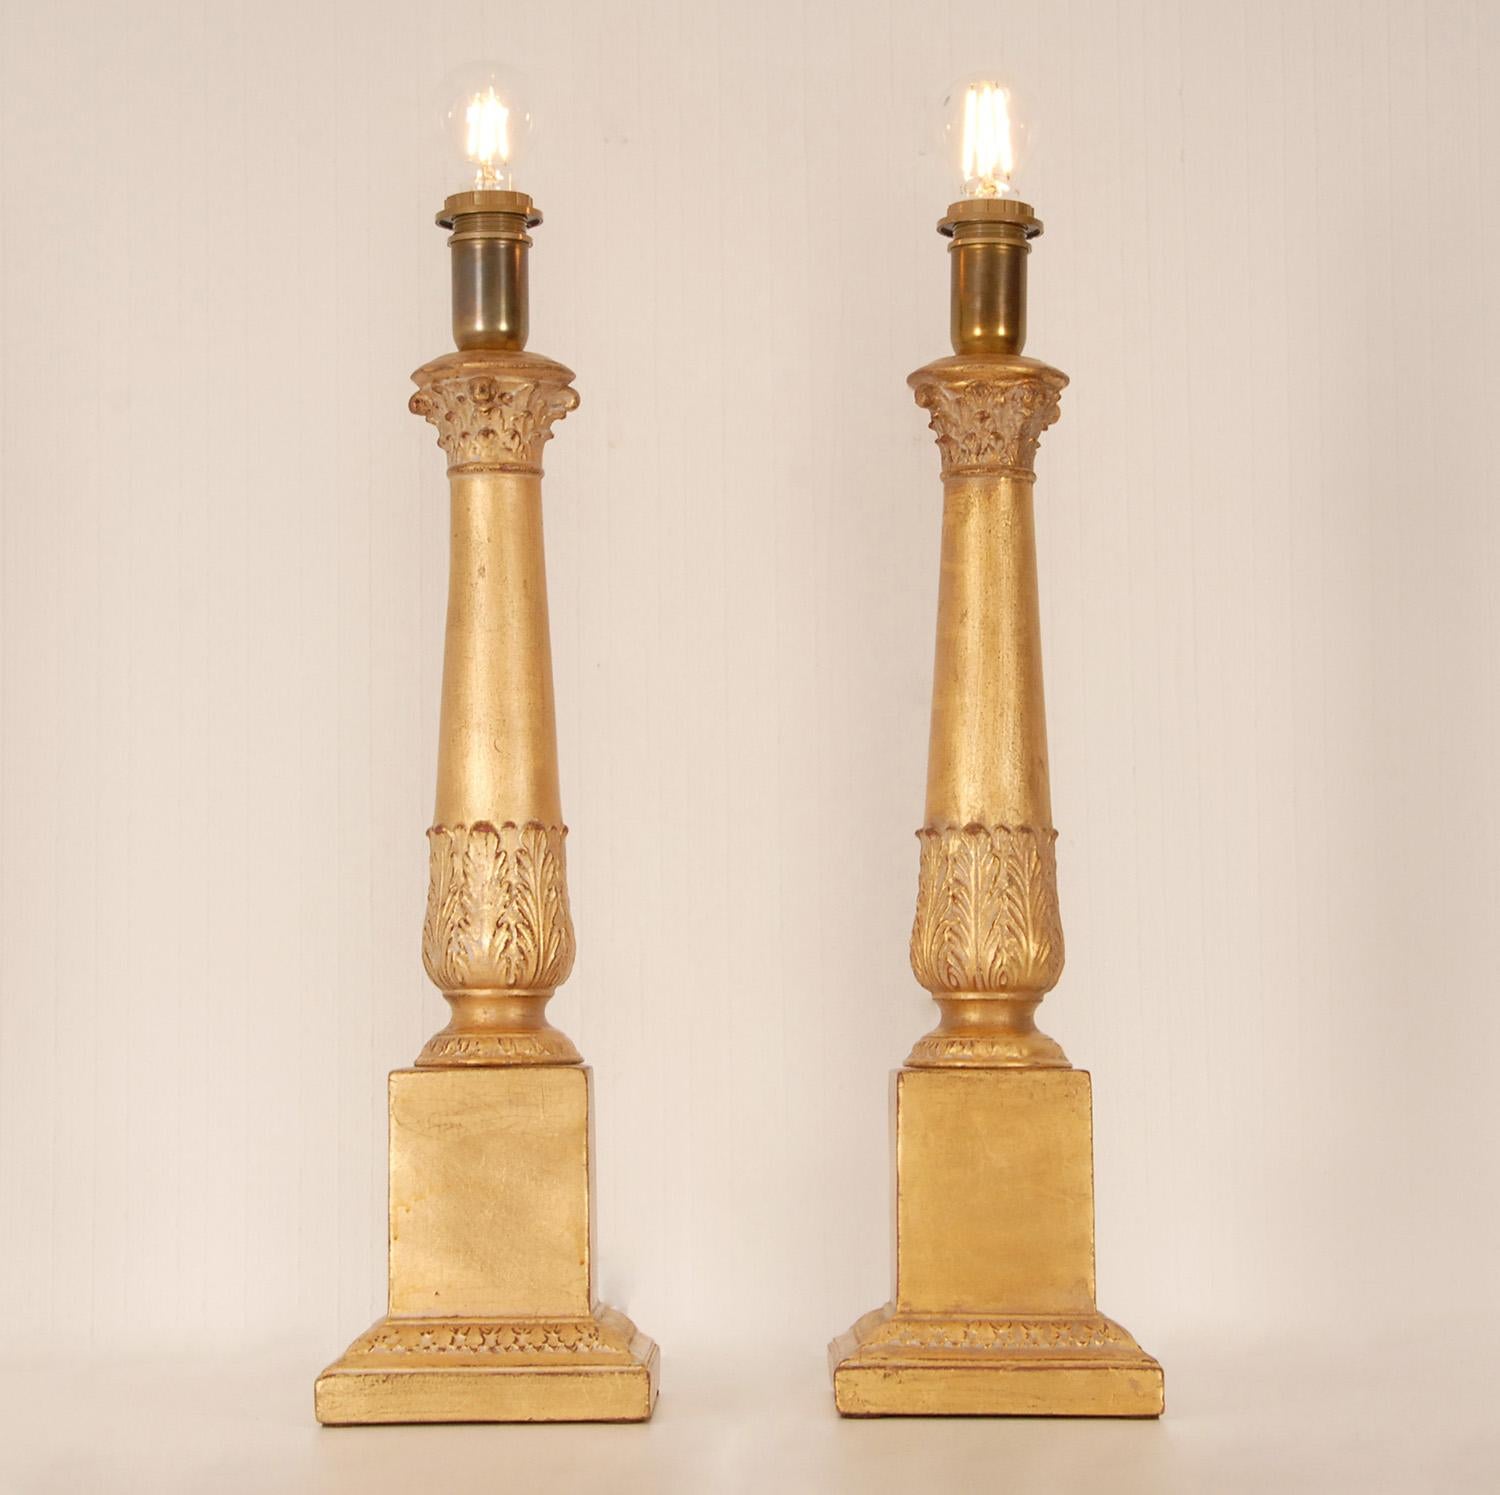 Vintage Italian Ceramic Lamps Gold Gilded Corinthian Column Table Lamps a Pair In Good Condition For Sale In Wommelgem, VAN